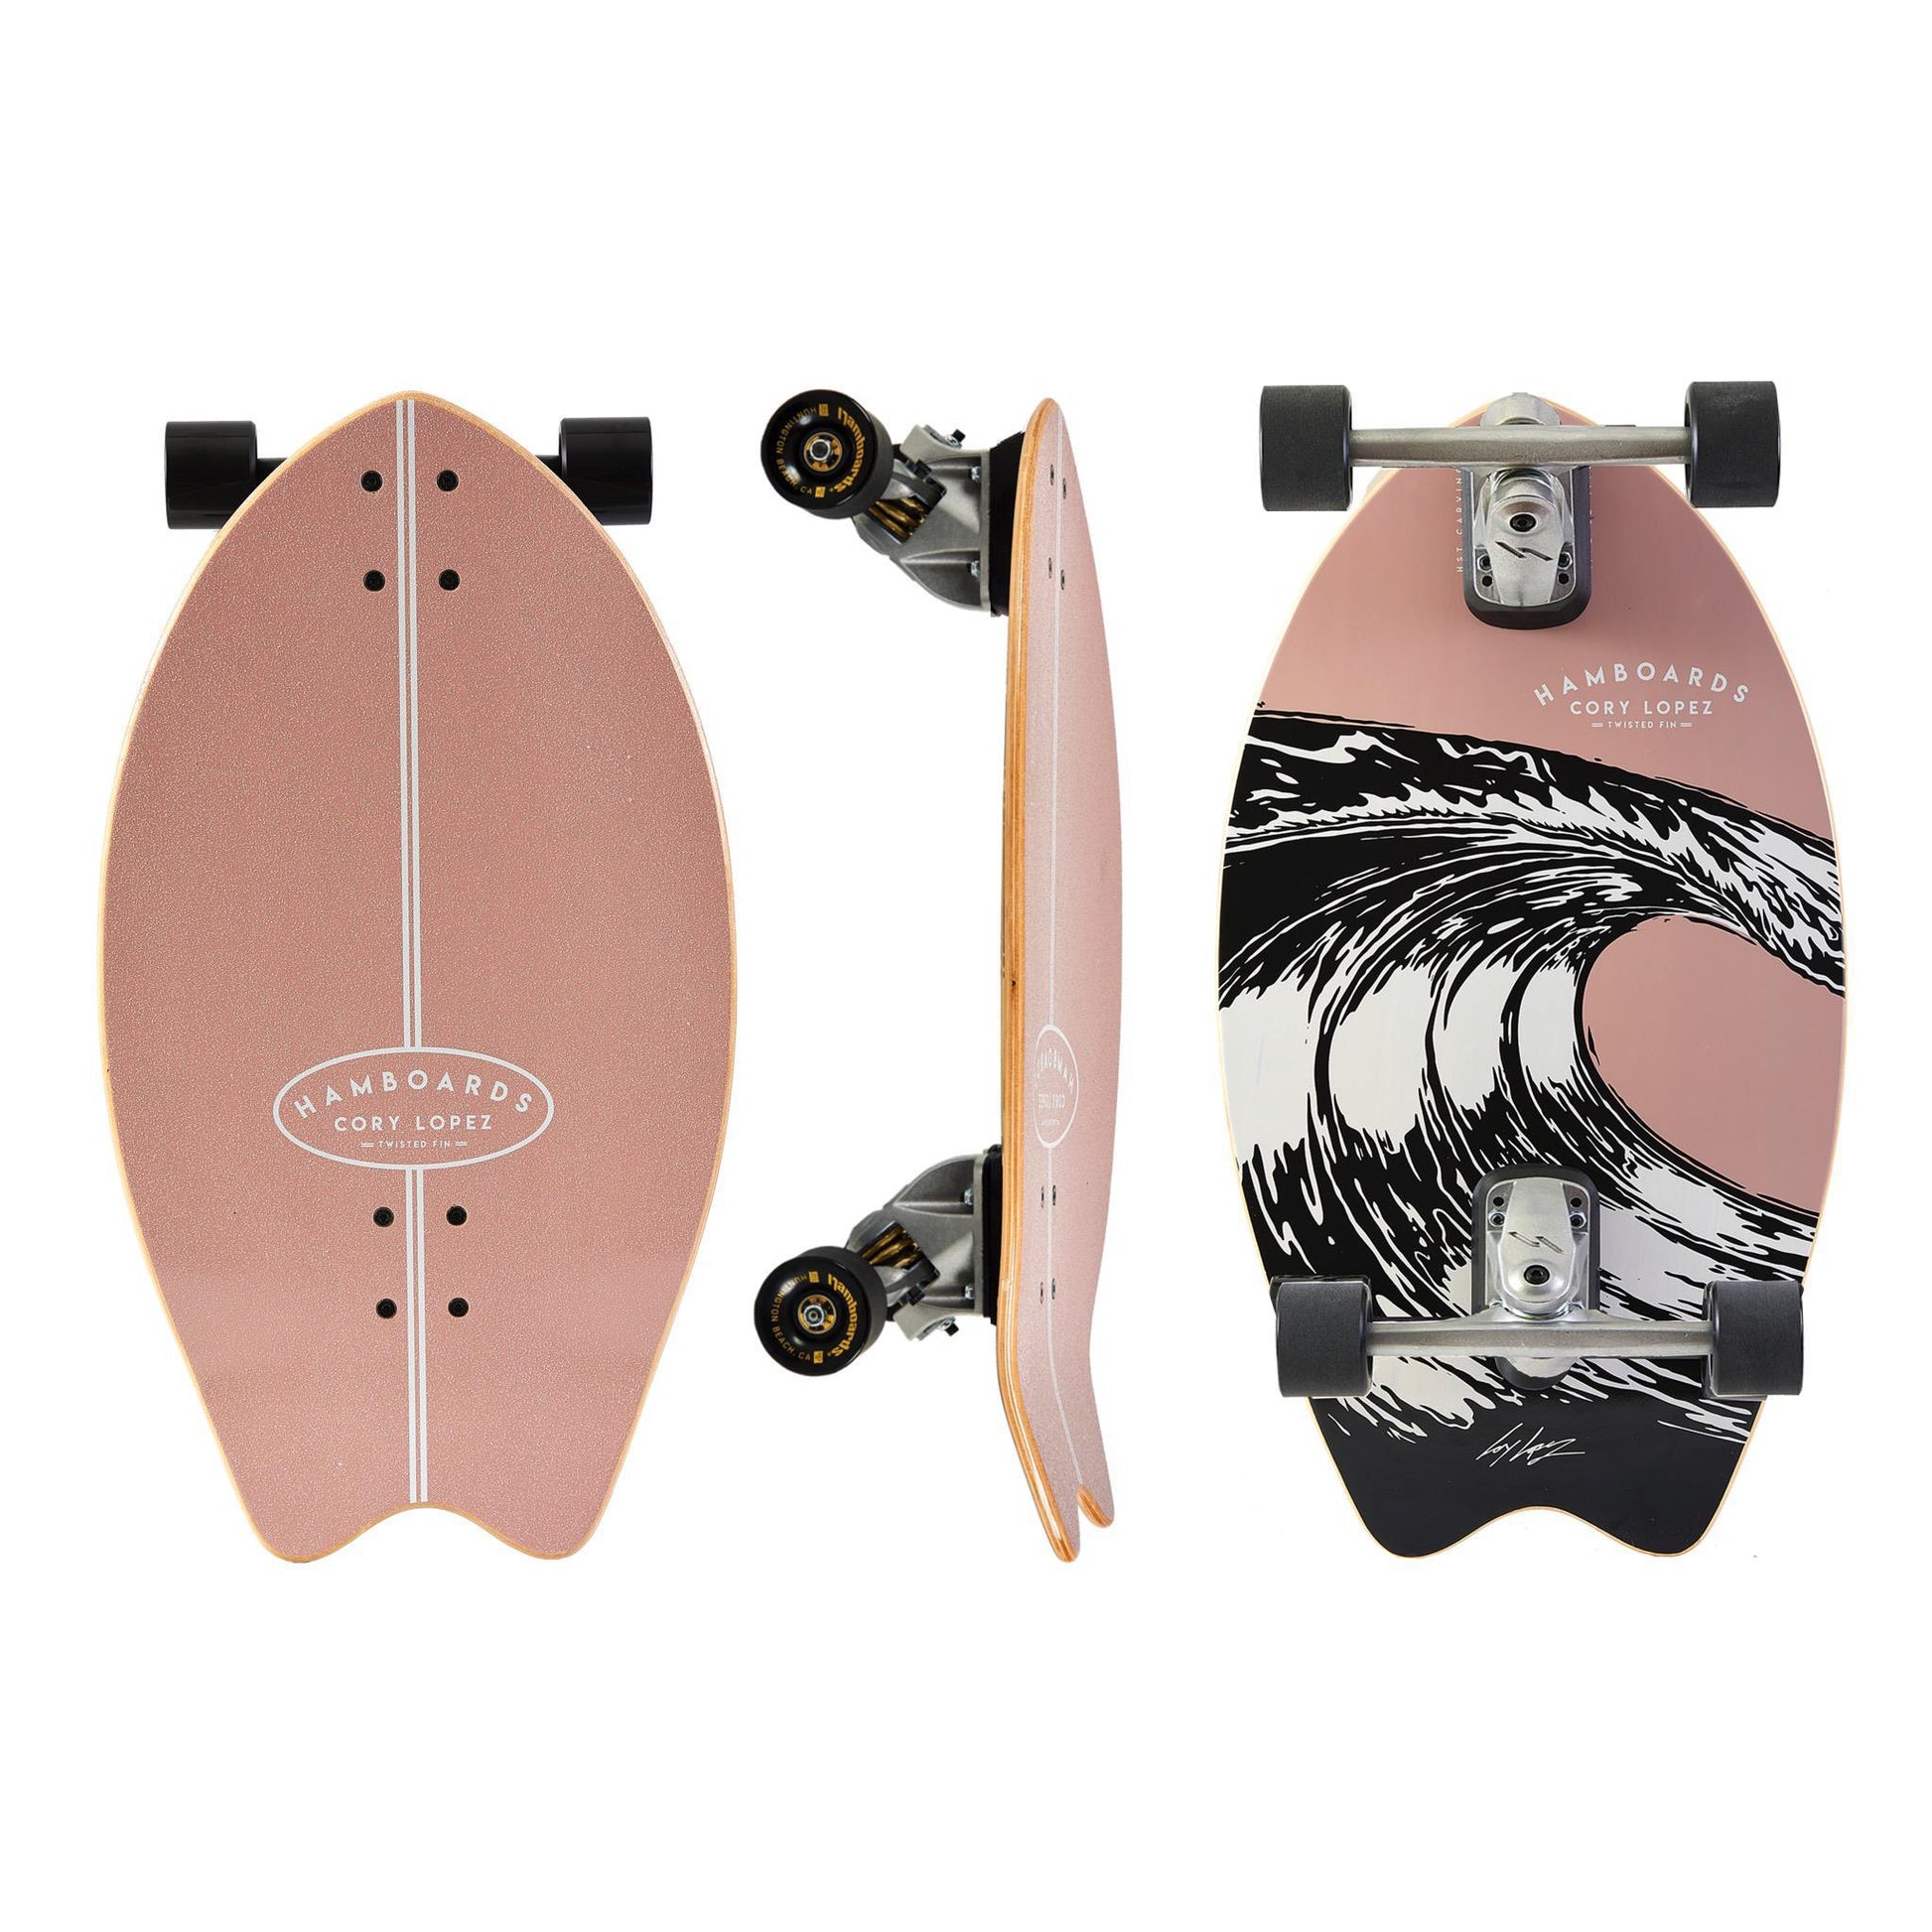 Pastel Twisted Fin - CL - Hamboards